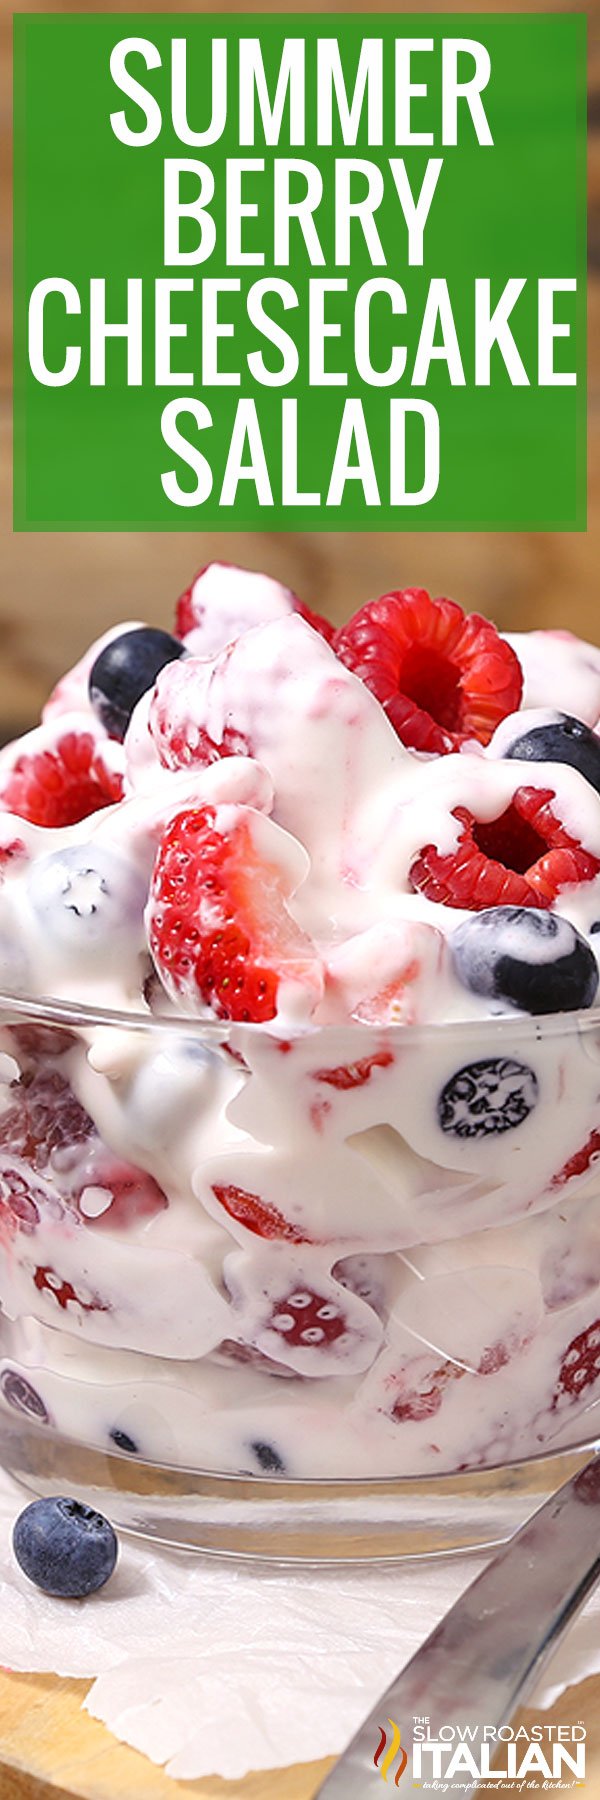 titled image (and shown): summer berry cheesecake salad